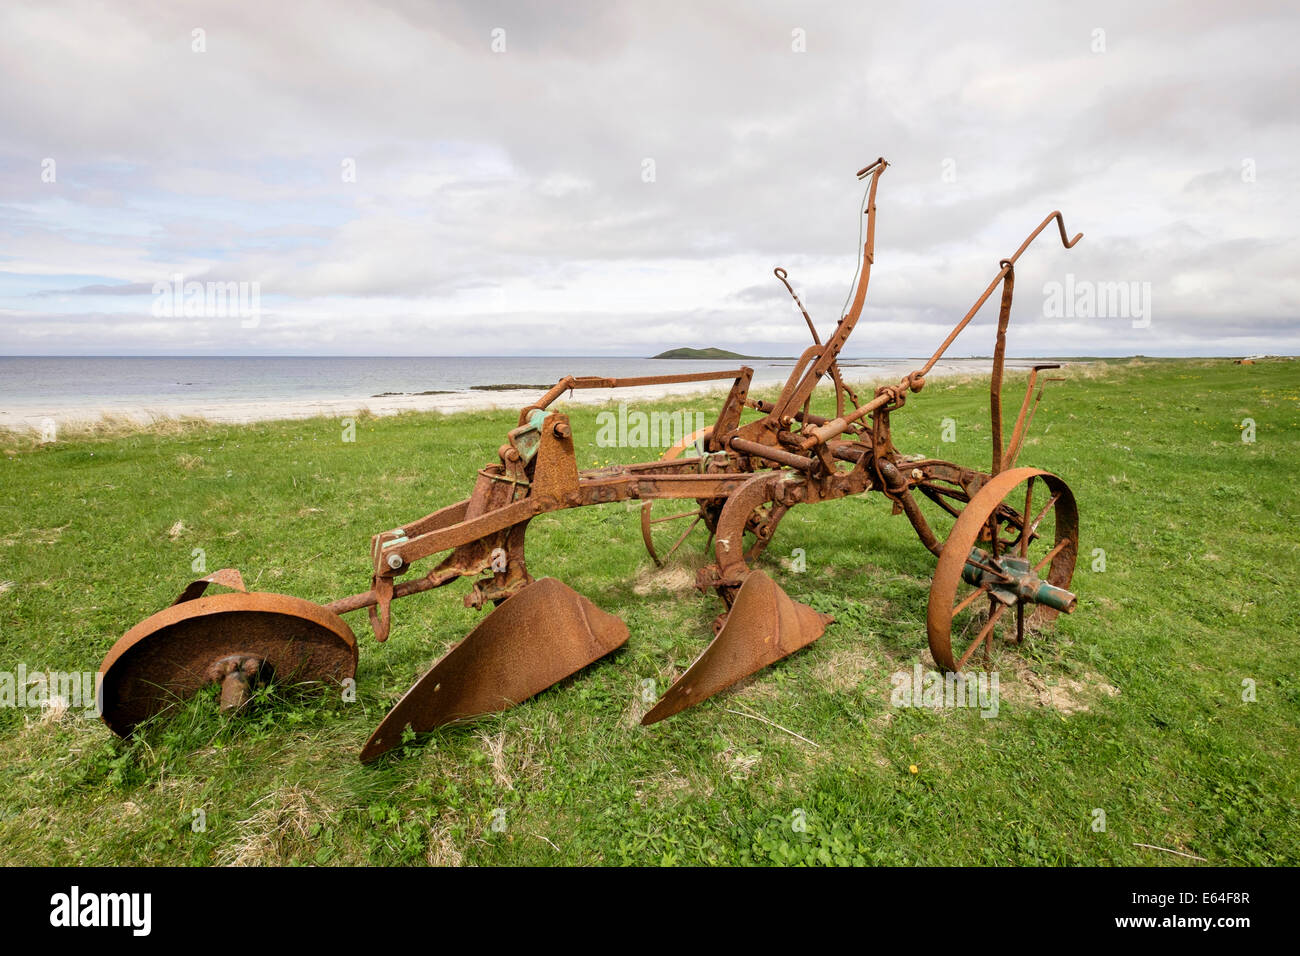 Vintage rusty handplough standing idle abandoned in farm field on west coast of South Uist Outer Hebrides Western Isles Scotland UK Britain Stock Photo